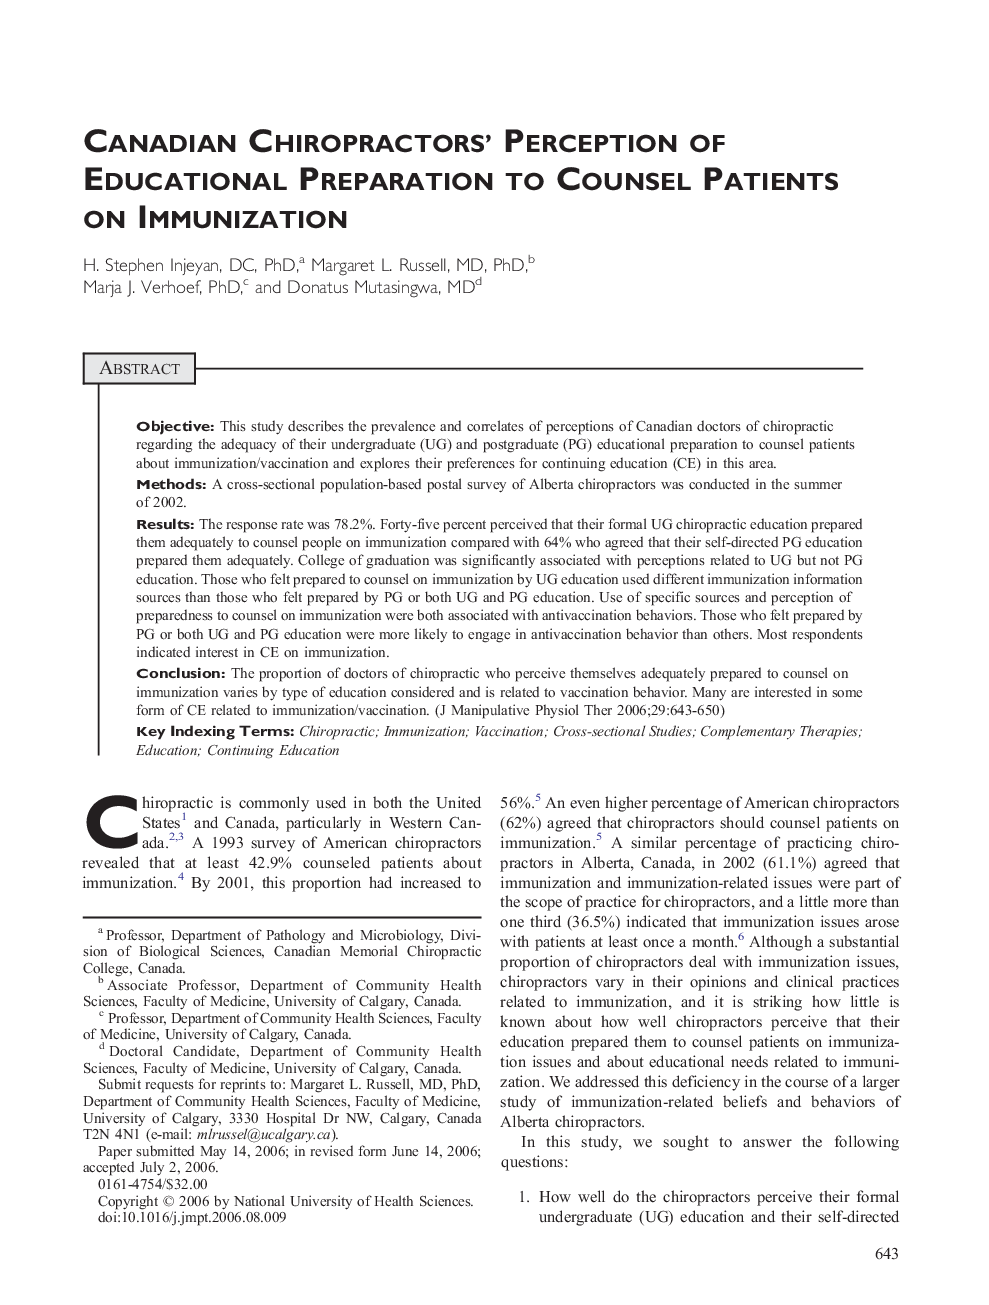 Canadian Chiropractors' Perception of Educational Preparation to Counsel Patients on Immunization